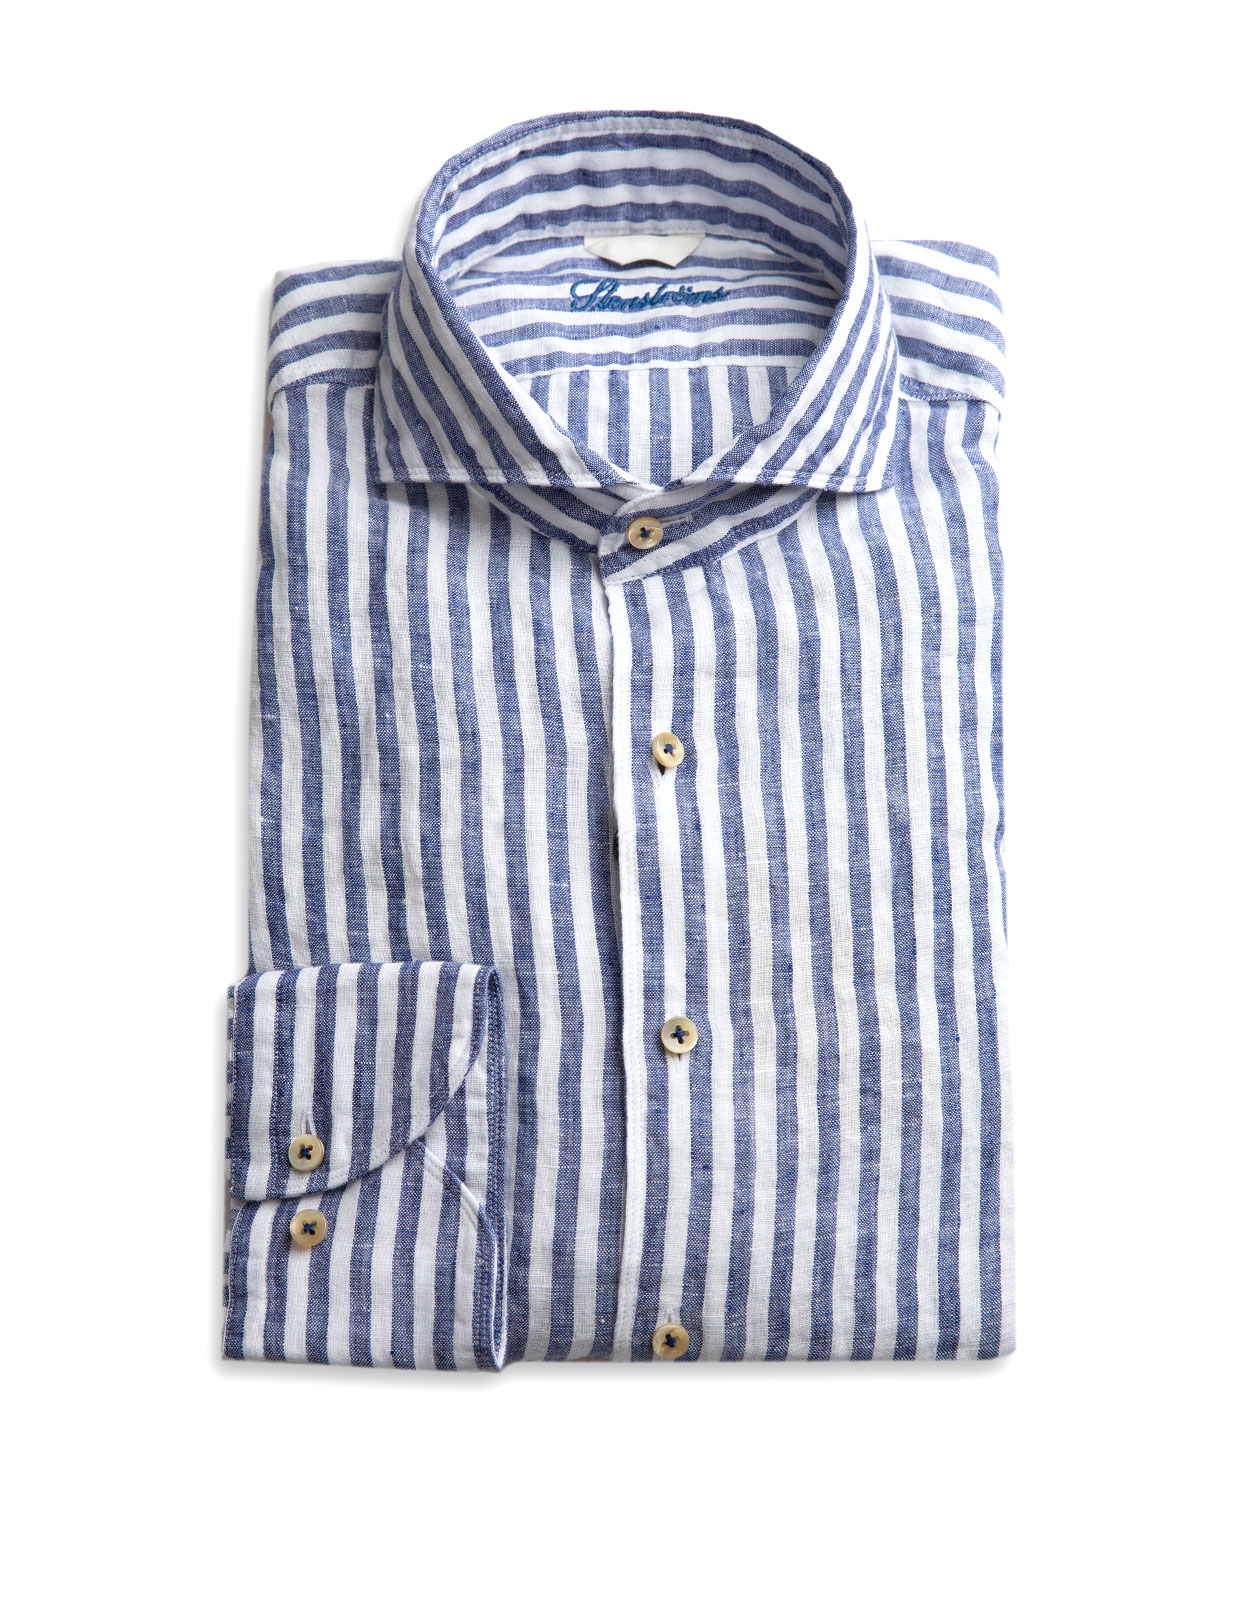 Fitted Body Shirt Striped Linen Navy/White Stl L